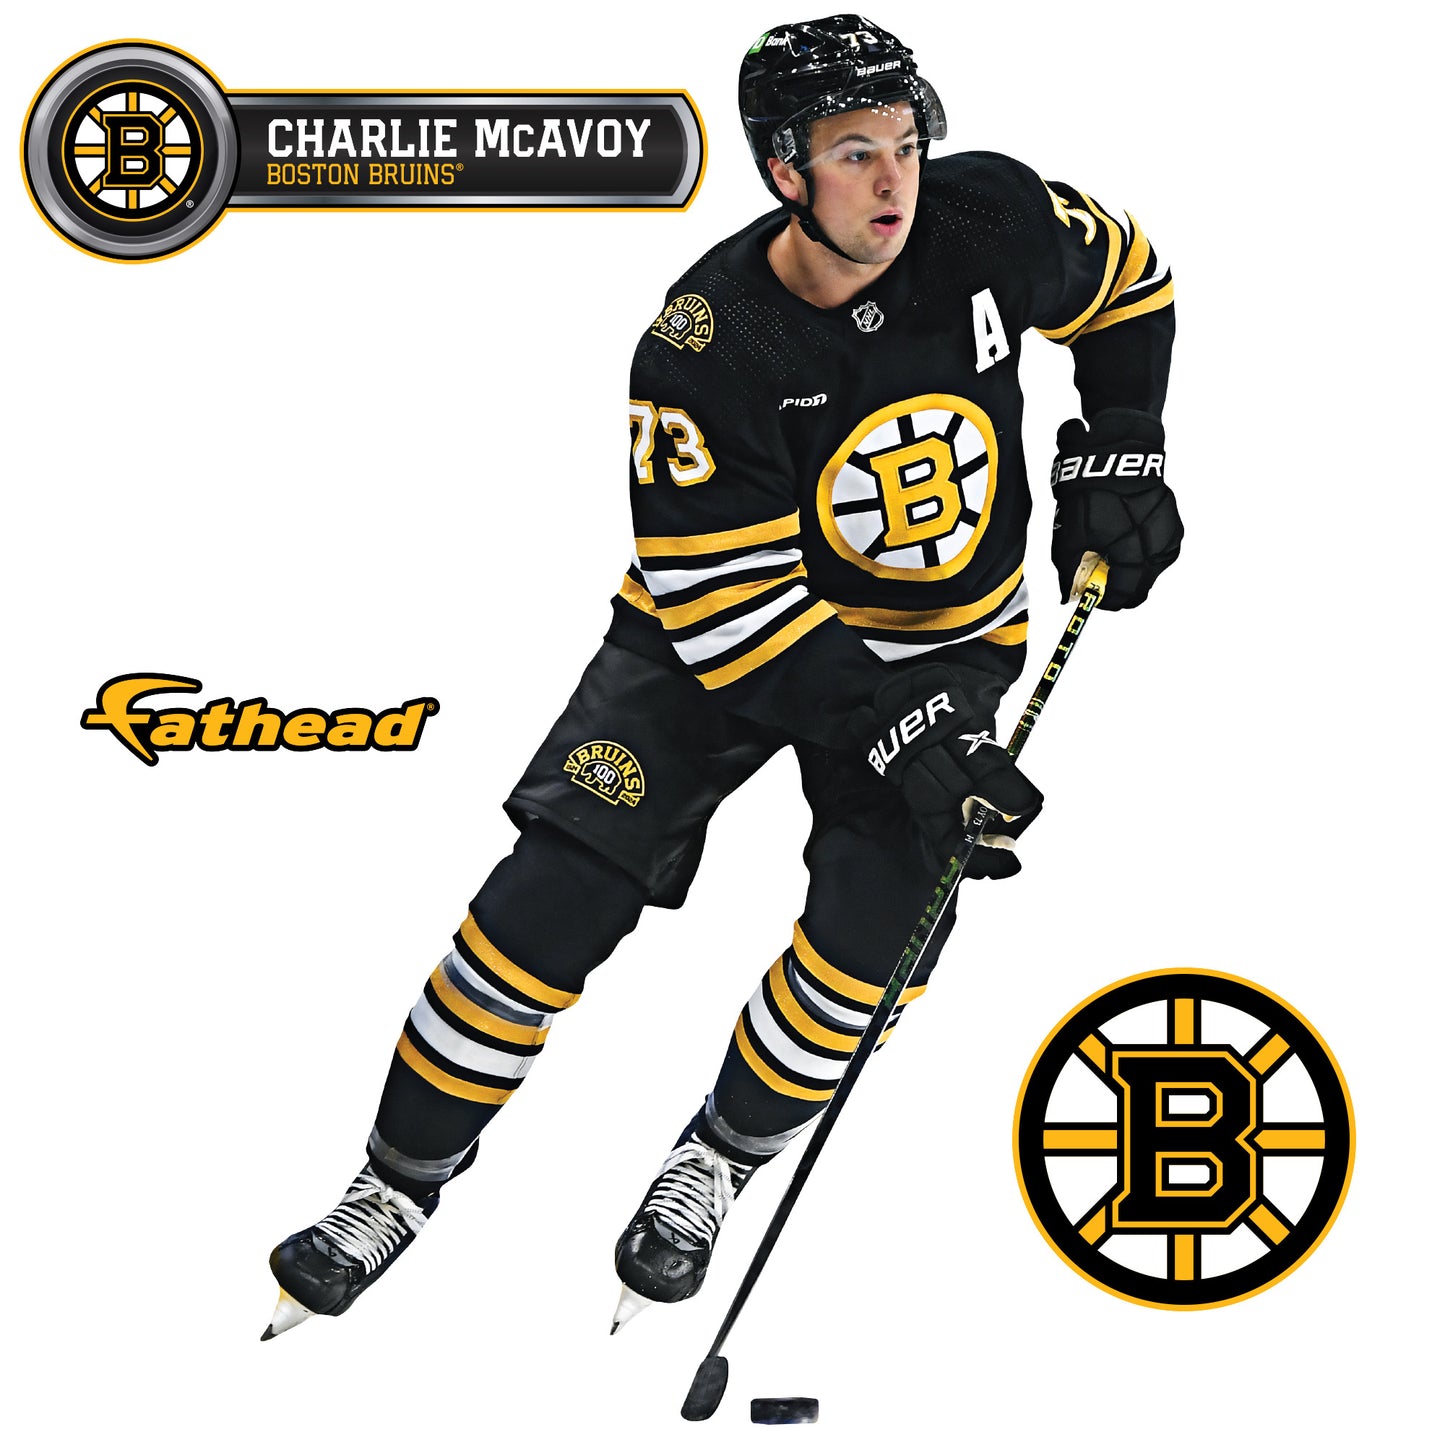 Boston Bruins: Charlie McAvoy         - Officially Licensed NHL Removable     Adhesive Decal